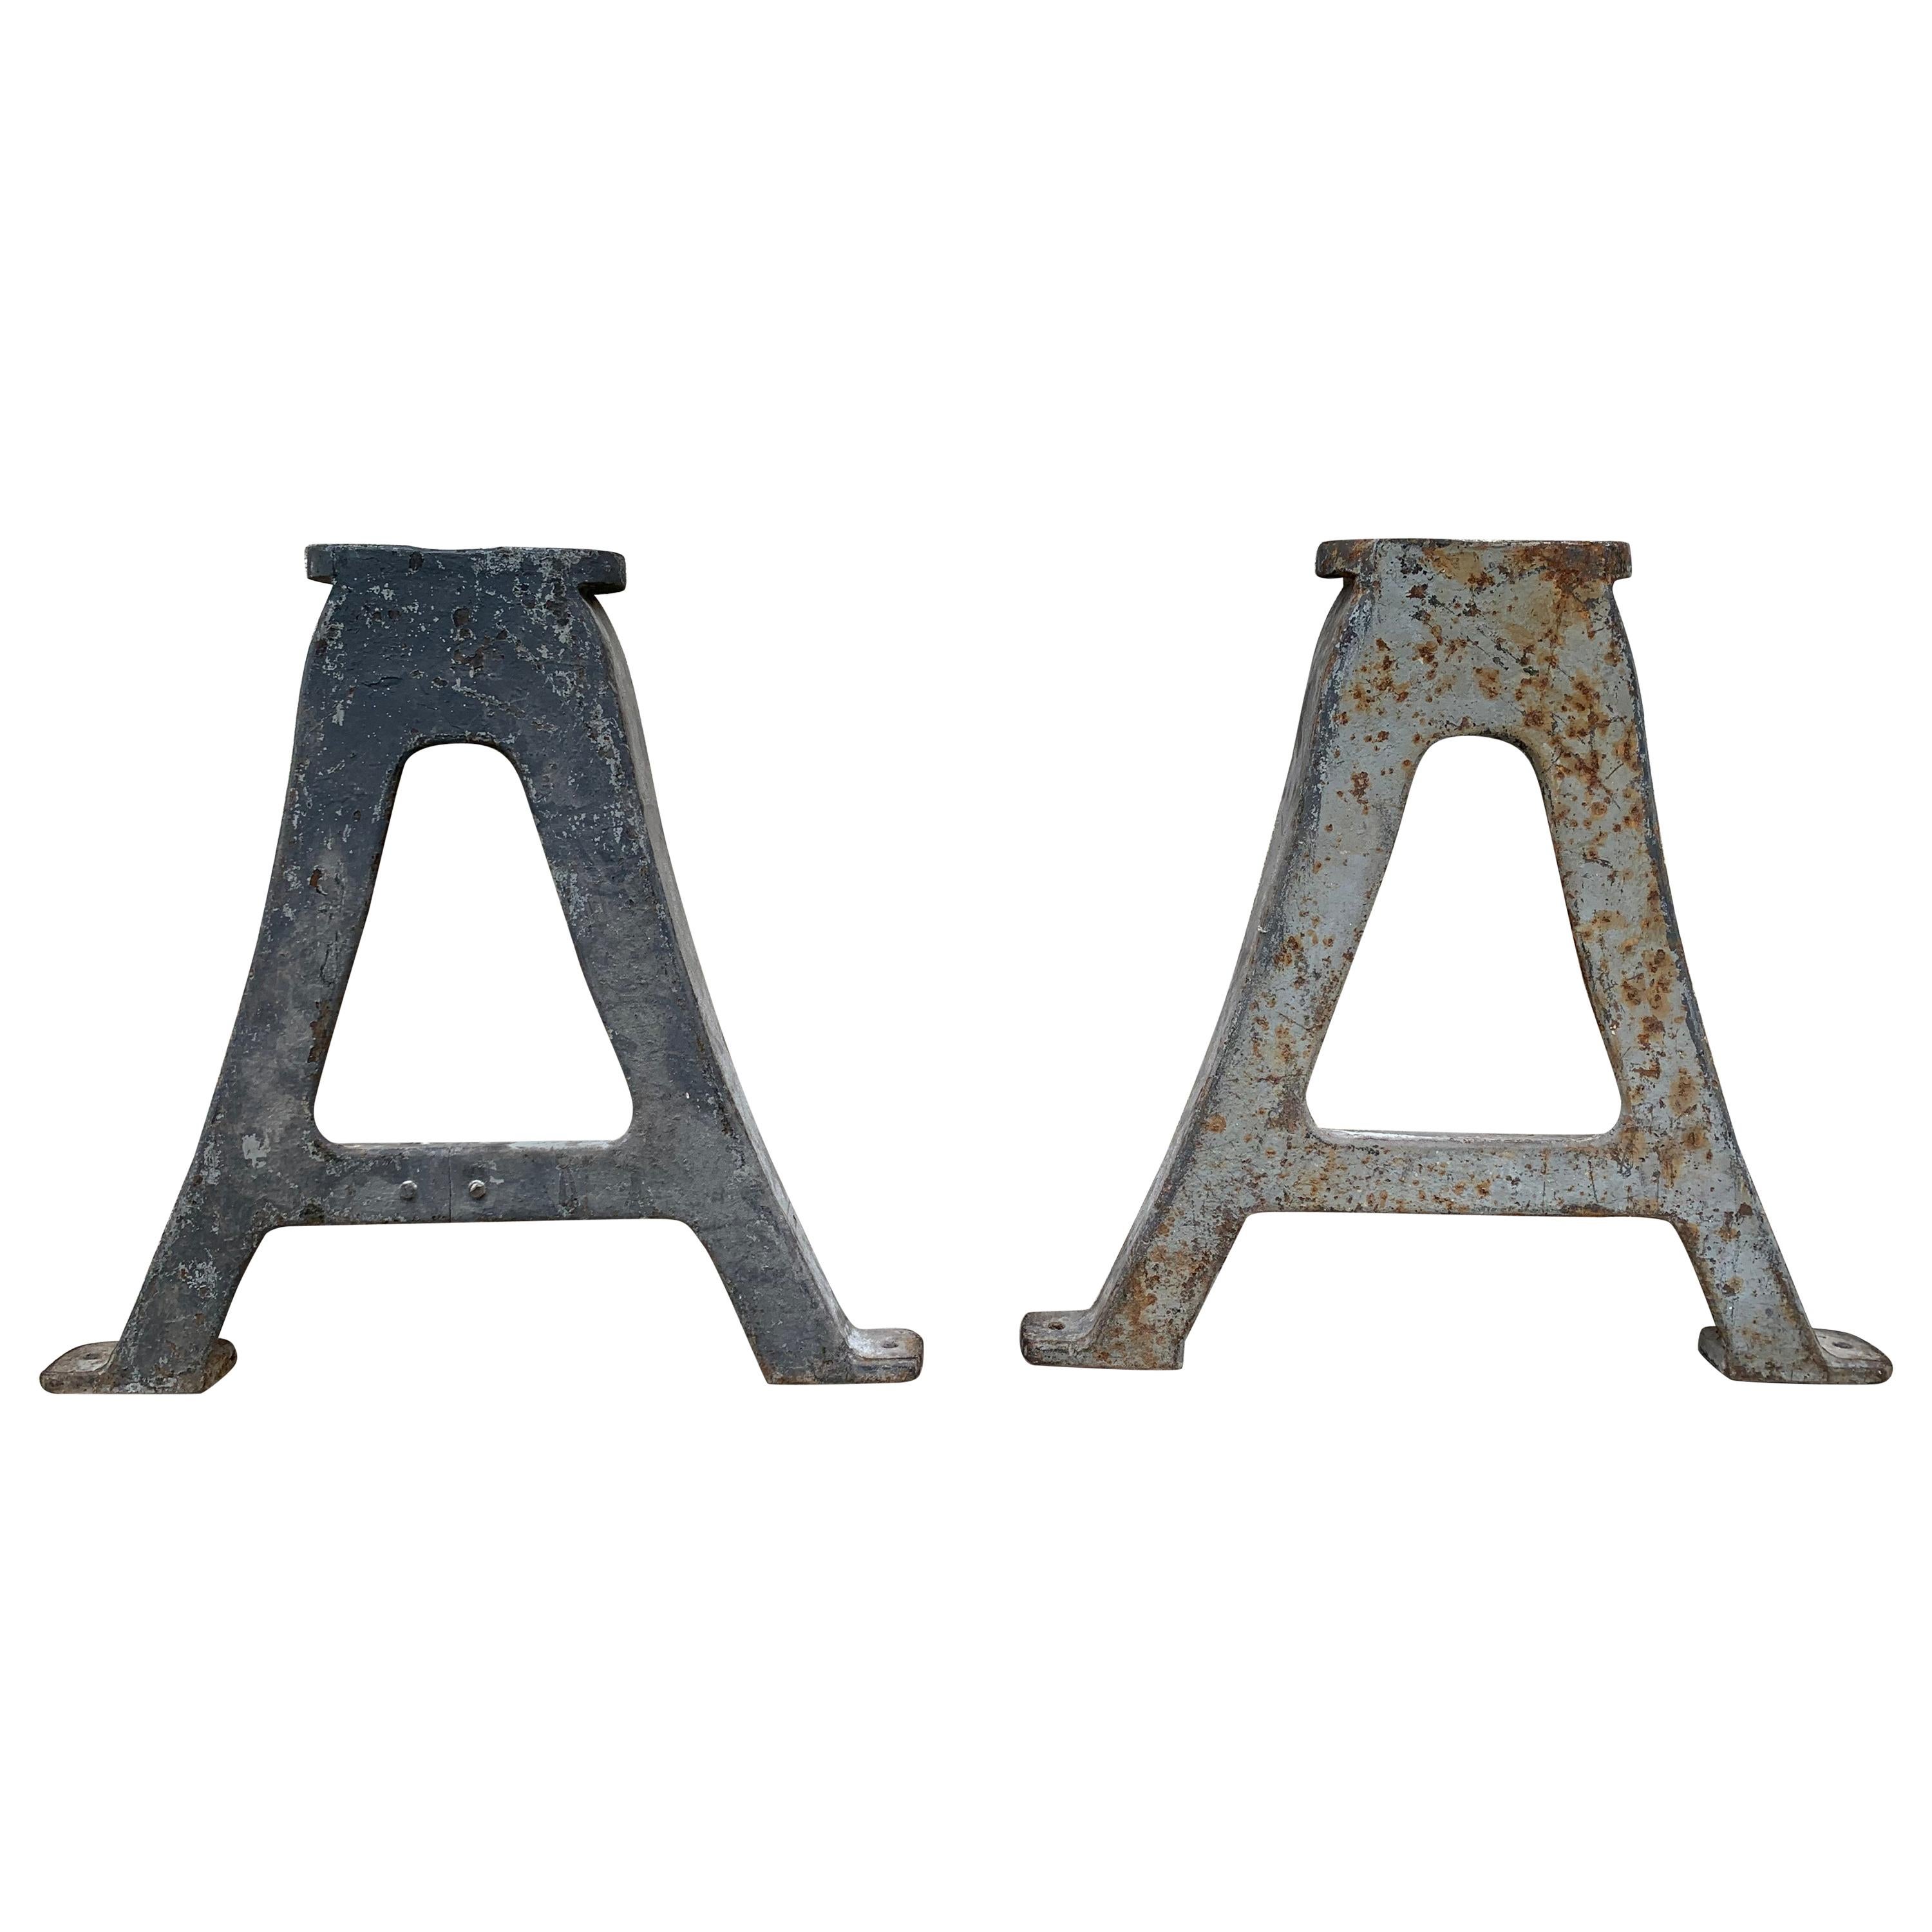 Pair of Industrial "A" Shaped Antique Iron Table Bases